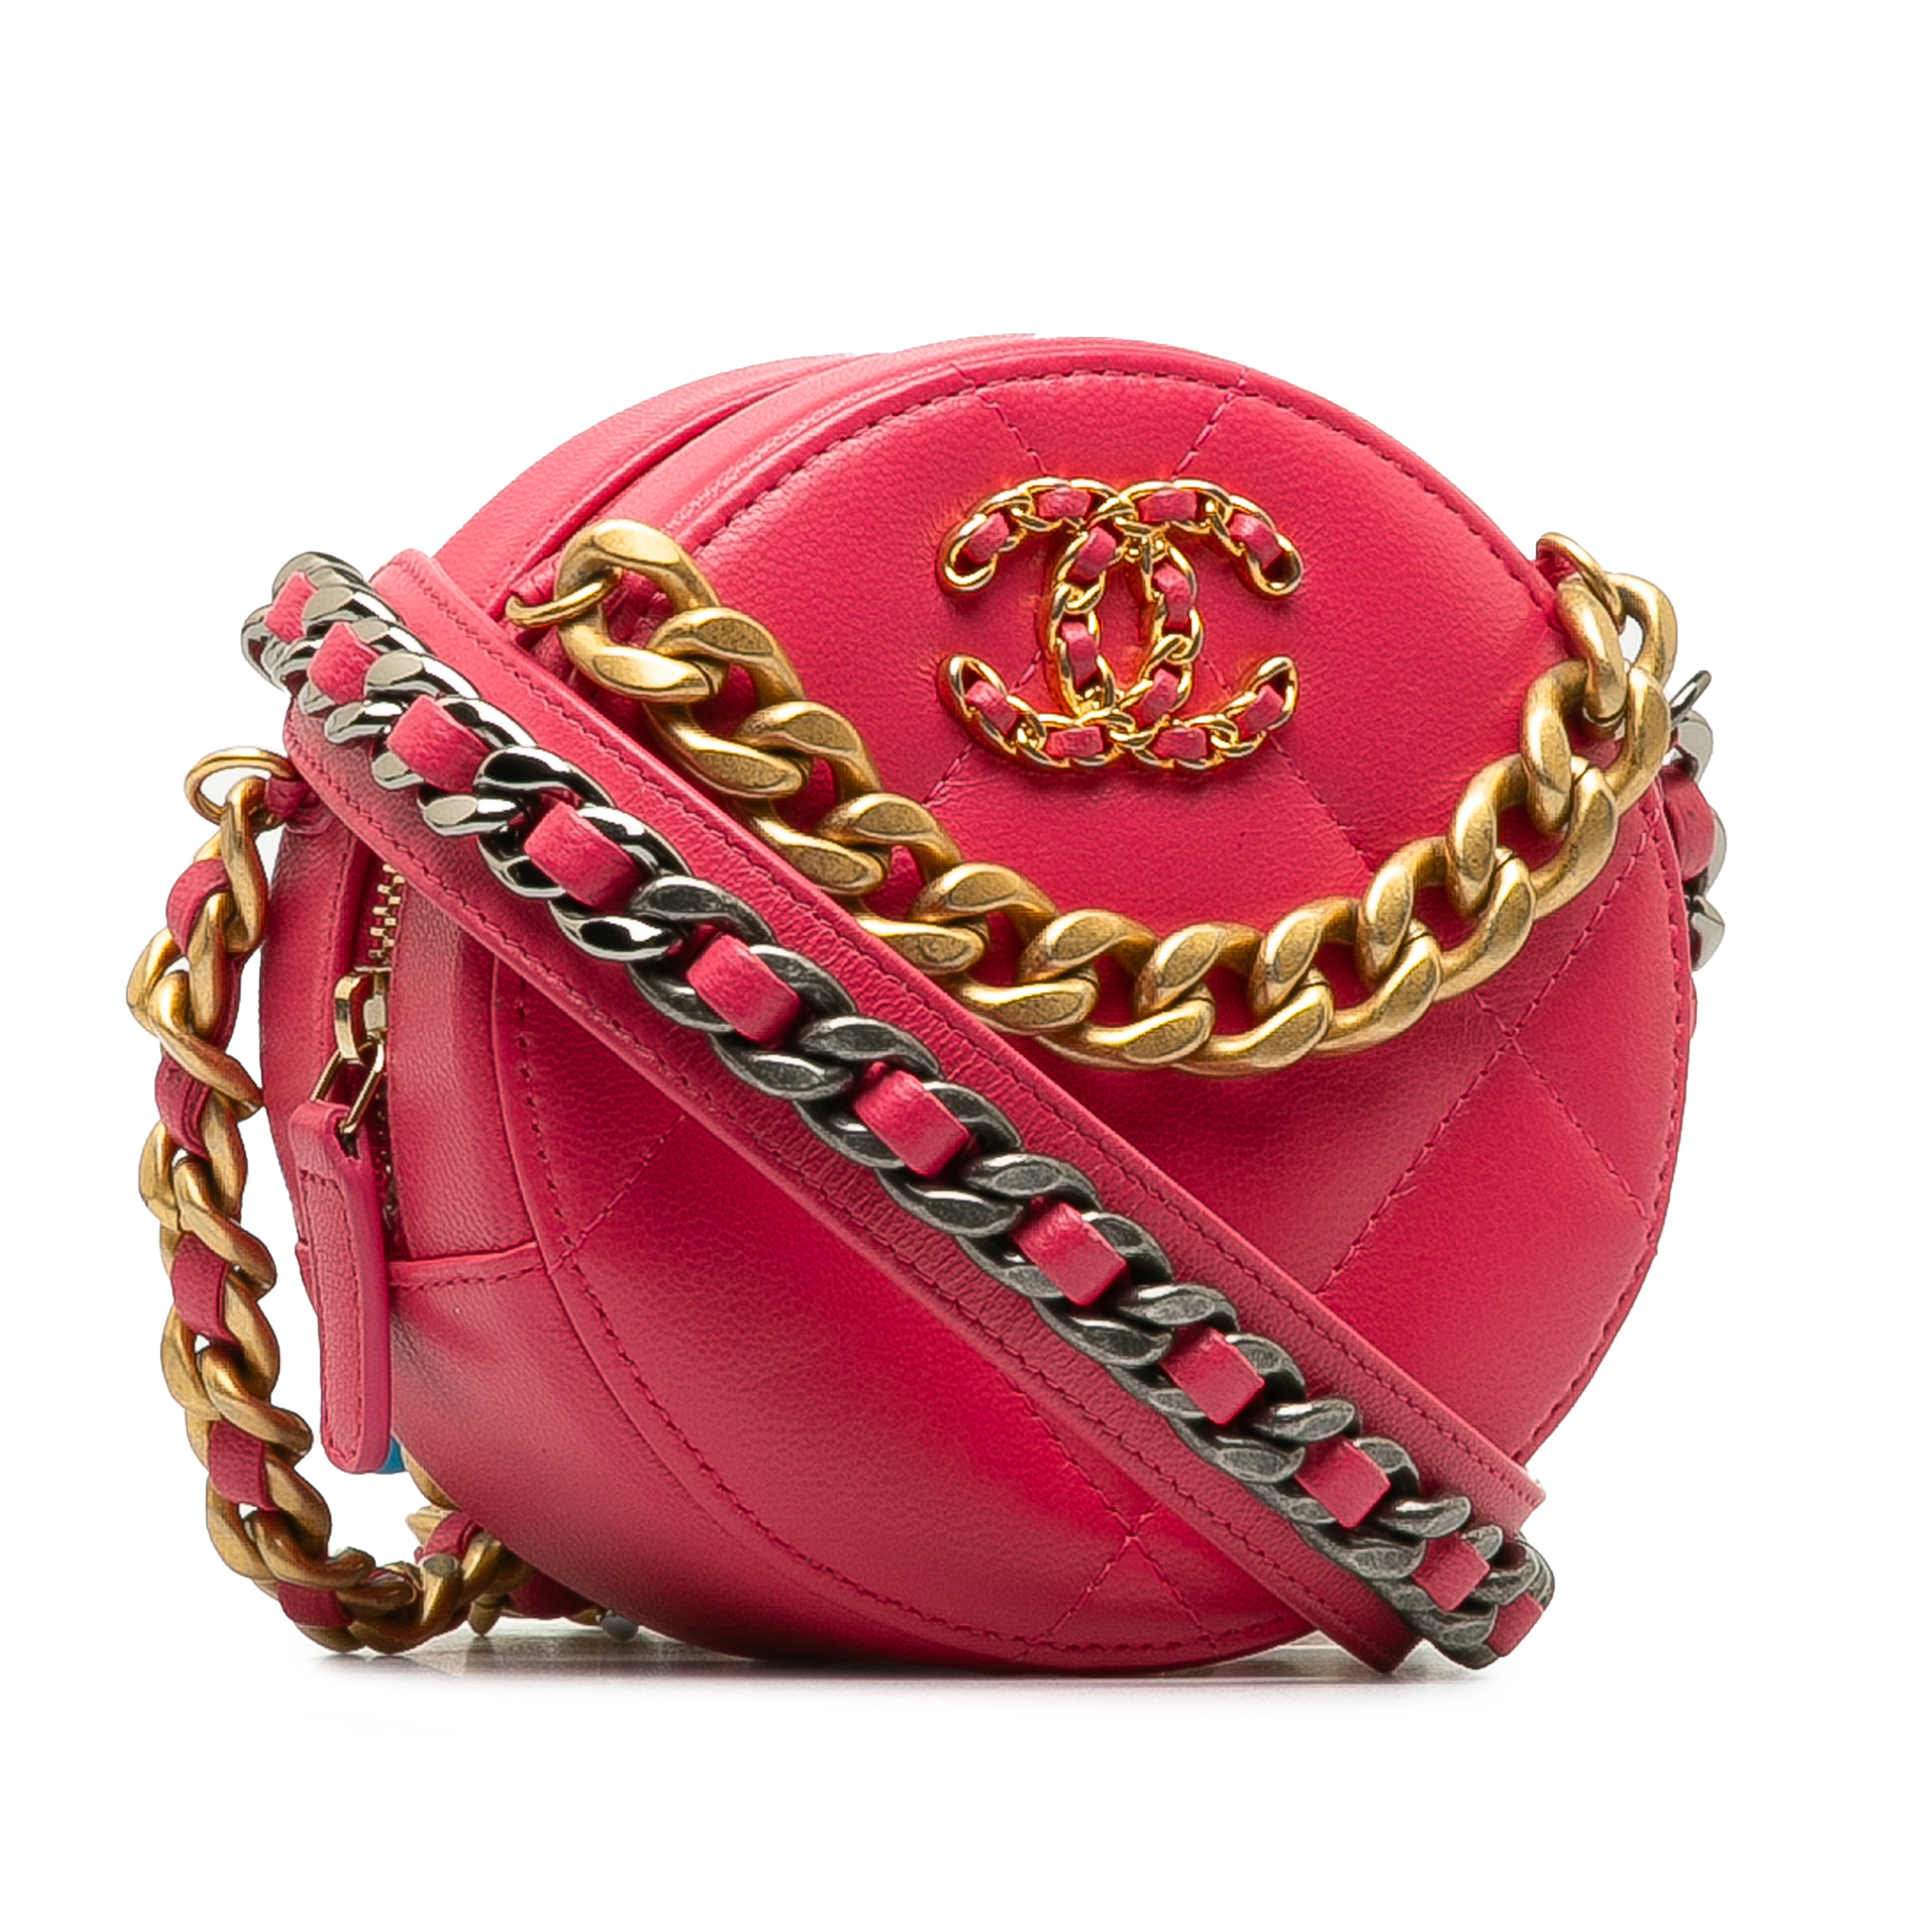 Chanel 19 Round Lambskin Clutch With Chain - Image 2 of 10